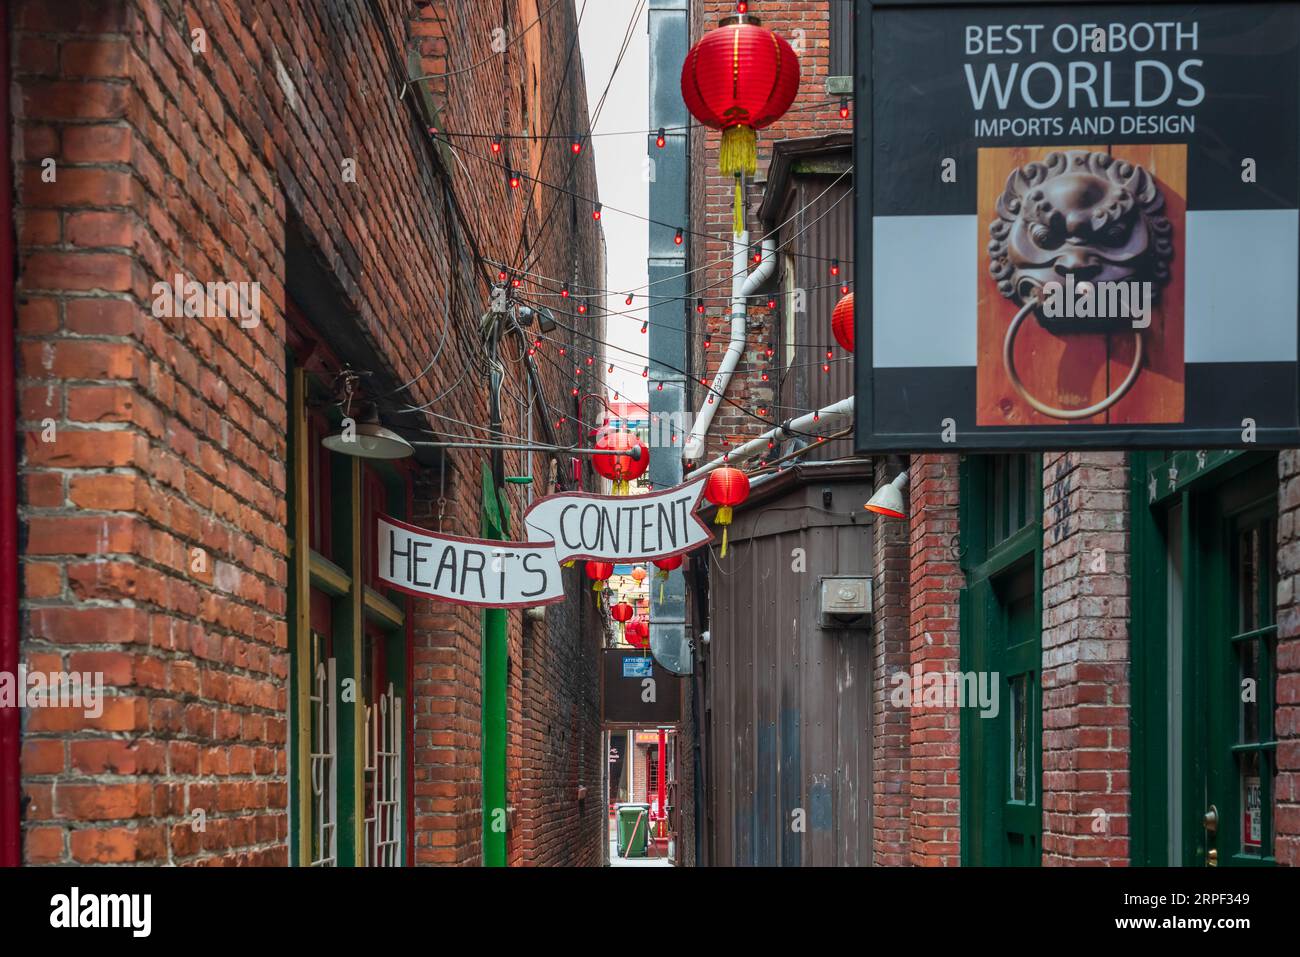 The narrow Fan Tan alley with shops in Victoria, British Columbia, Canada. Stock Photo